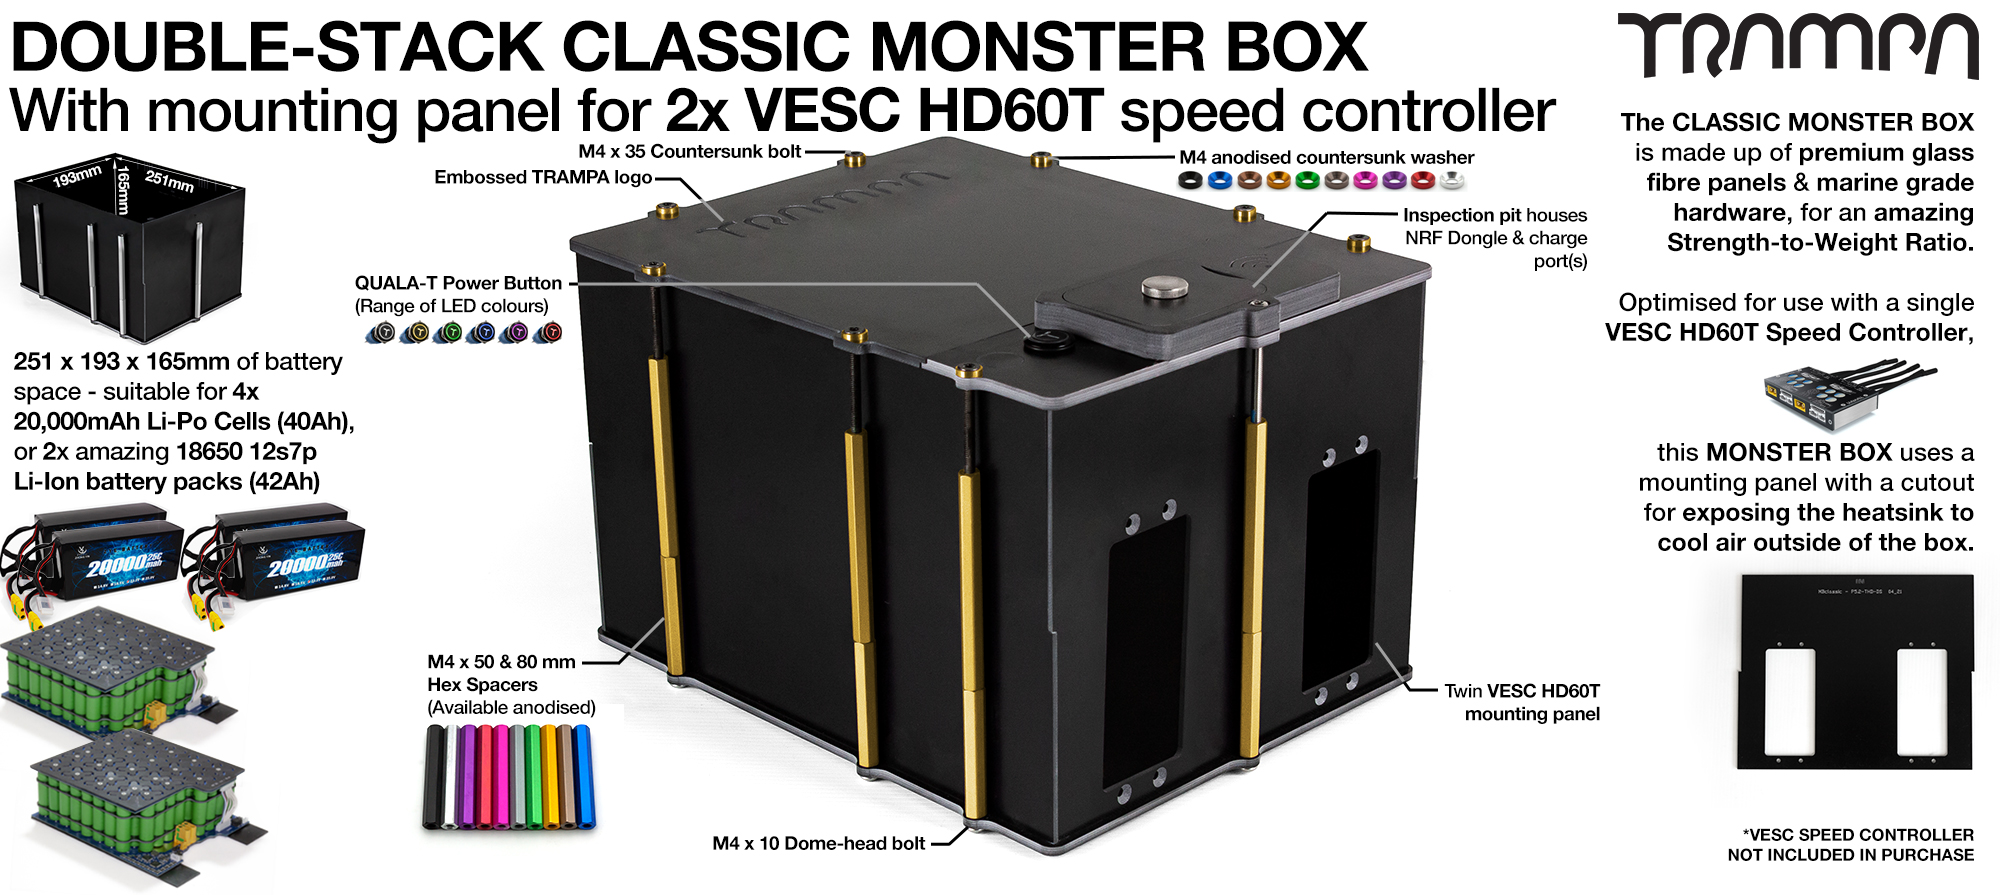 Classic MONSTER Box MkV DOUBLE STACKER fits 168x 18650 cells to give 42Ah Range or 4x 22000Ah Li-Po cells to give 44Ah Range & has Panels to fit 2x VESC HD-60T internally for 4WD